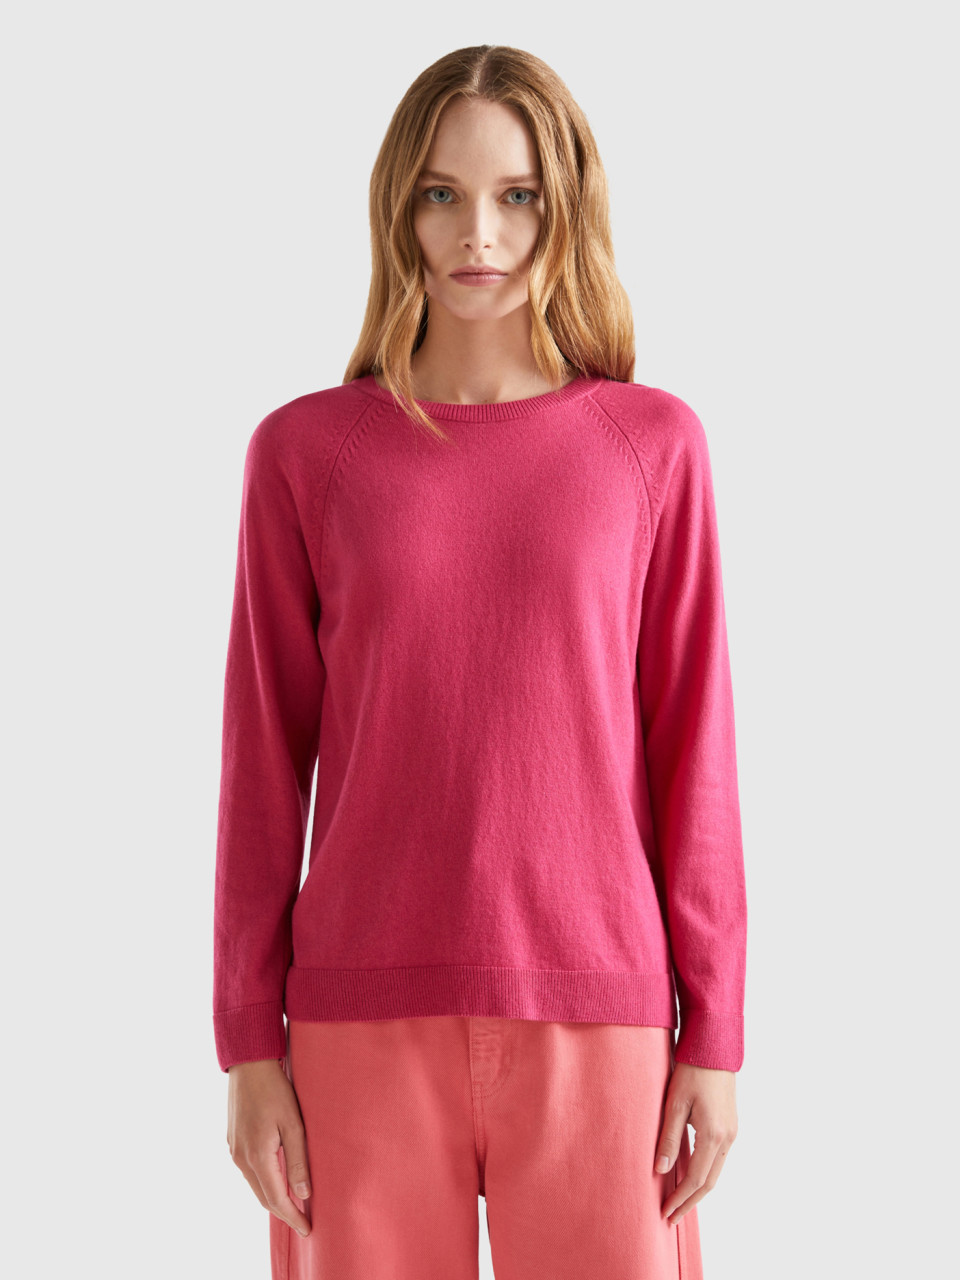 Benetton, Magenta Red Crew Neck Sweater In Cashmere And Wool Blend, Cyclamen, Women